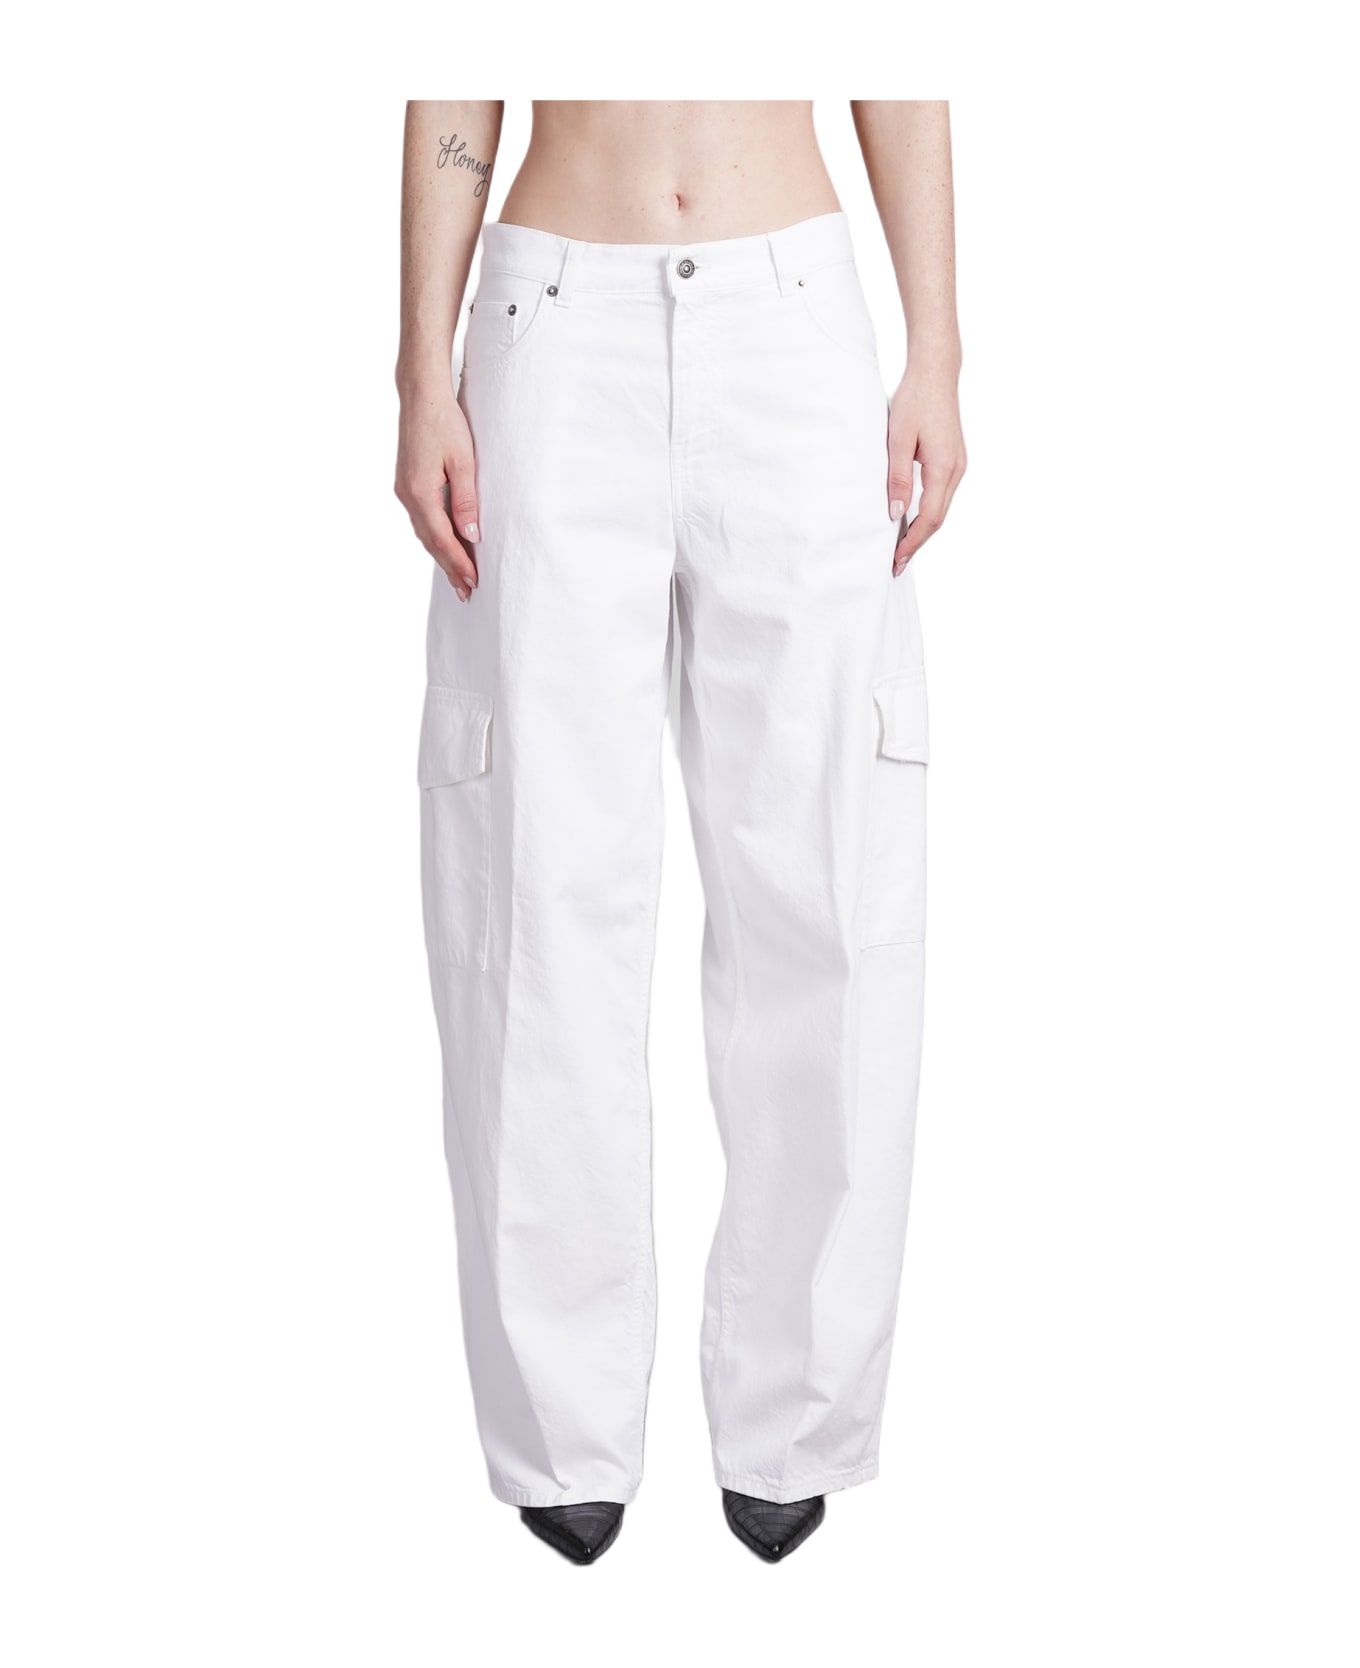 Haikure Bethany Jeans In White Cotton - white ボトムス